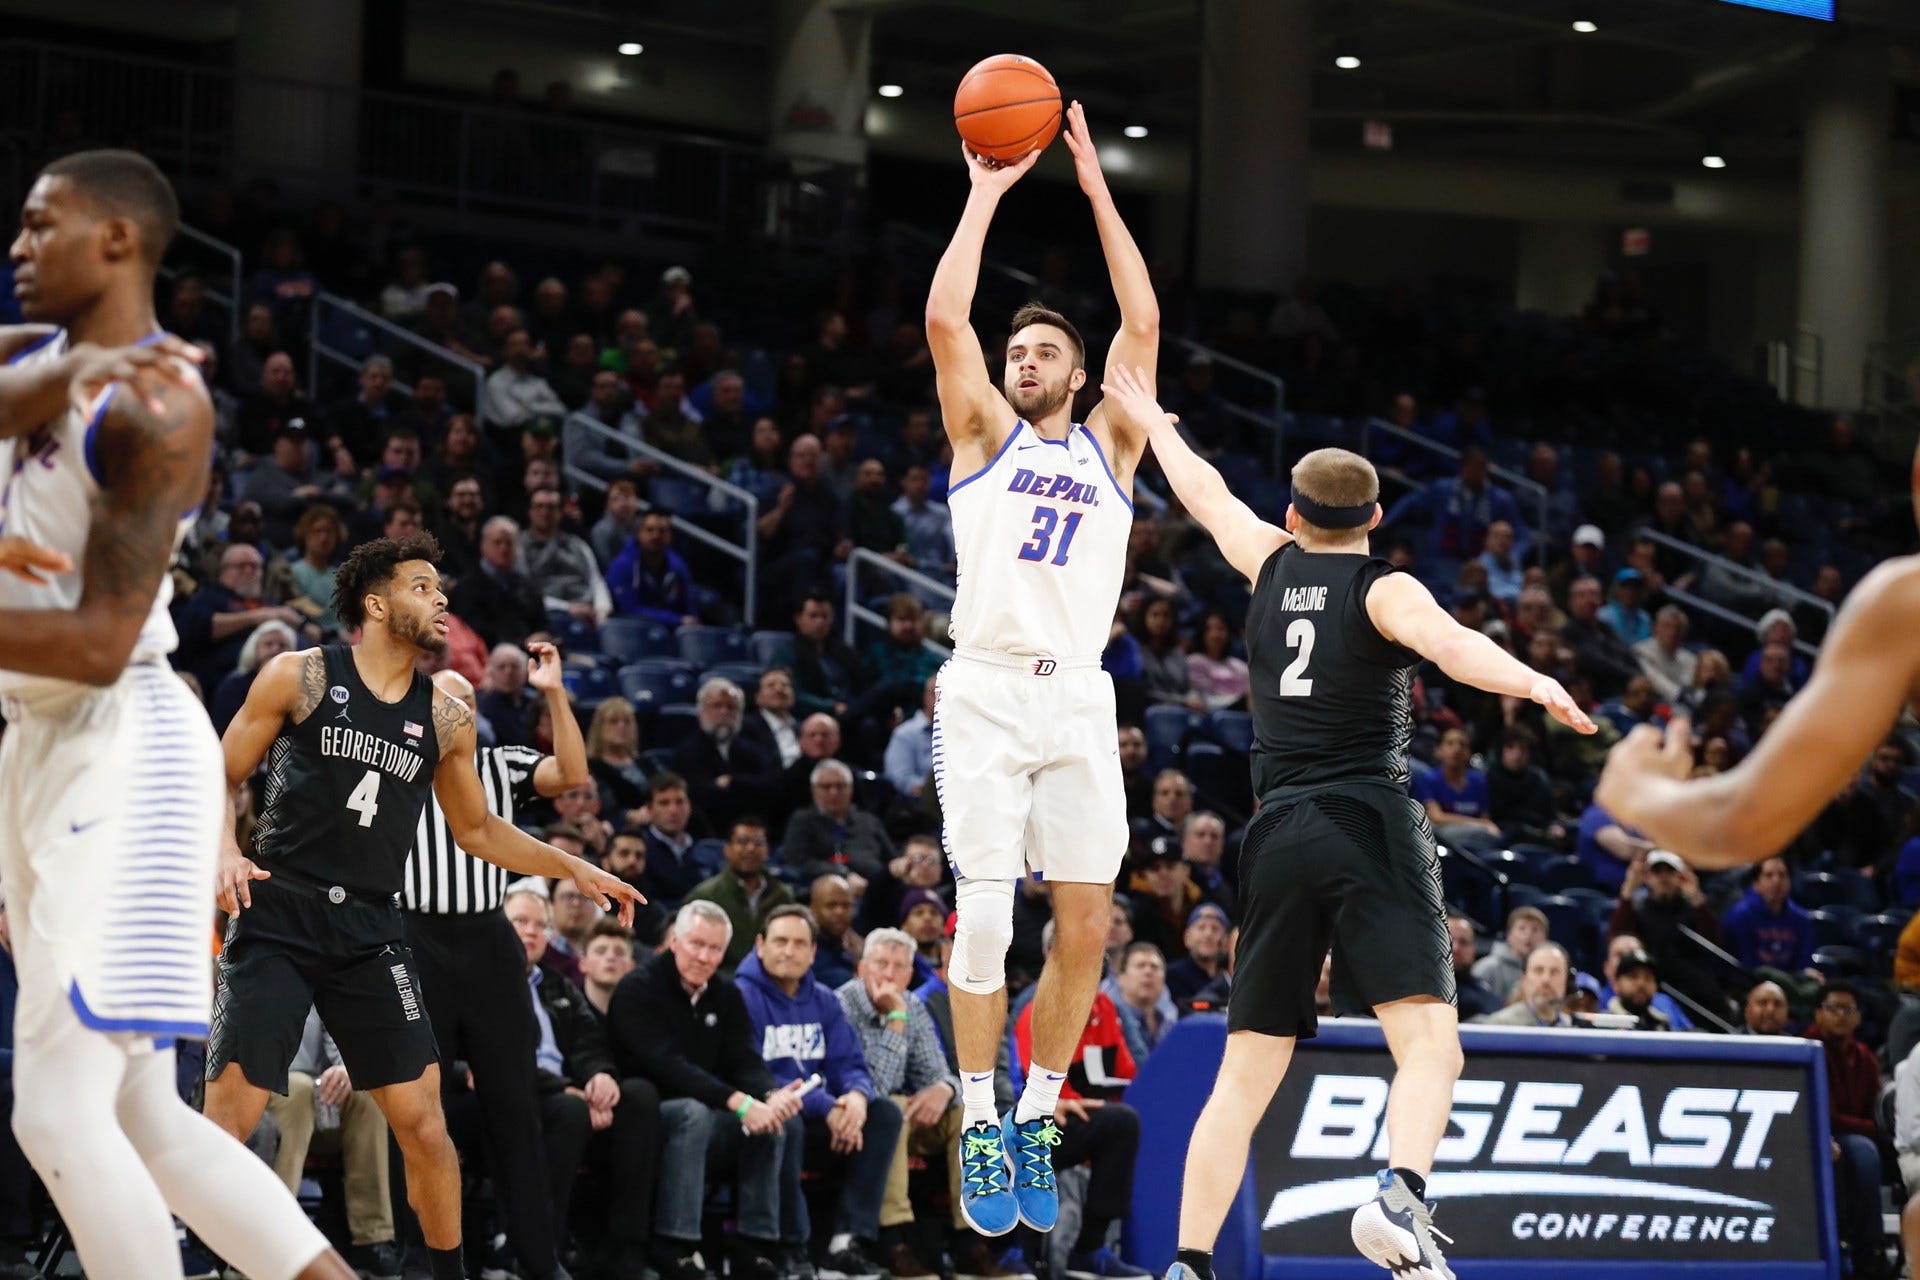 Bilas: Keep an eye on DePaul's Max Strus, a 6-5 D2 All-America transfer  from Lewis University. Strus had 22 points in DePaul's last exhibition :  r/CollegeBasketball